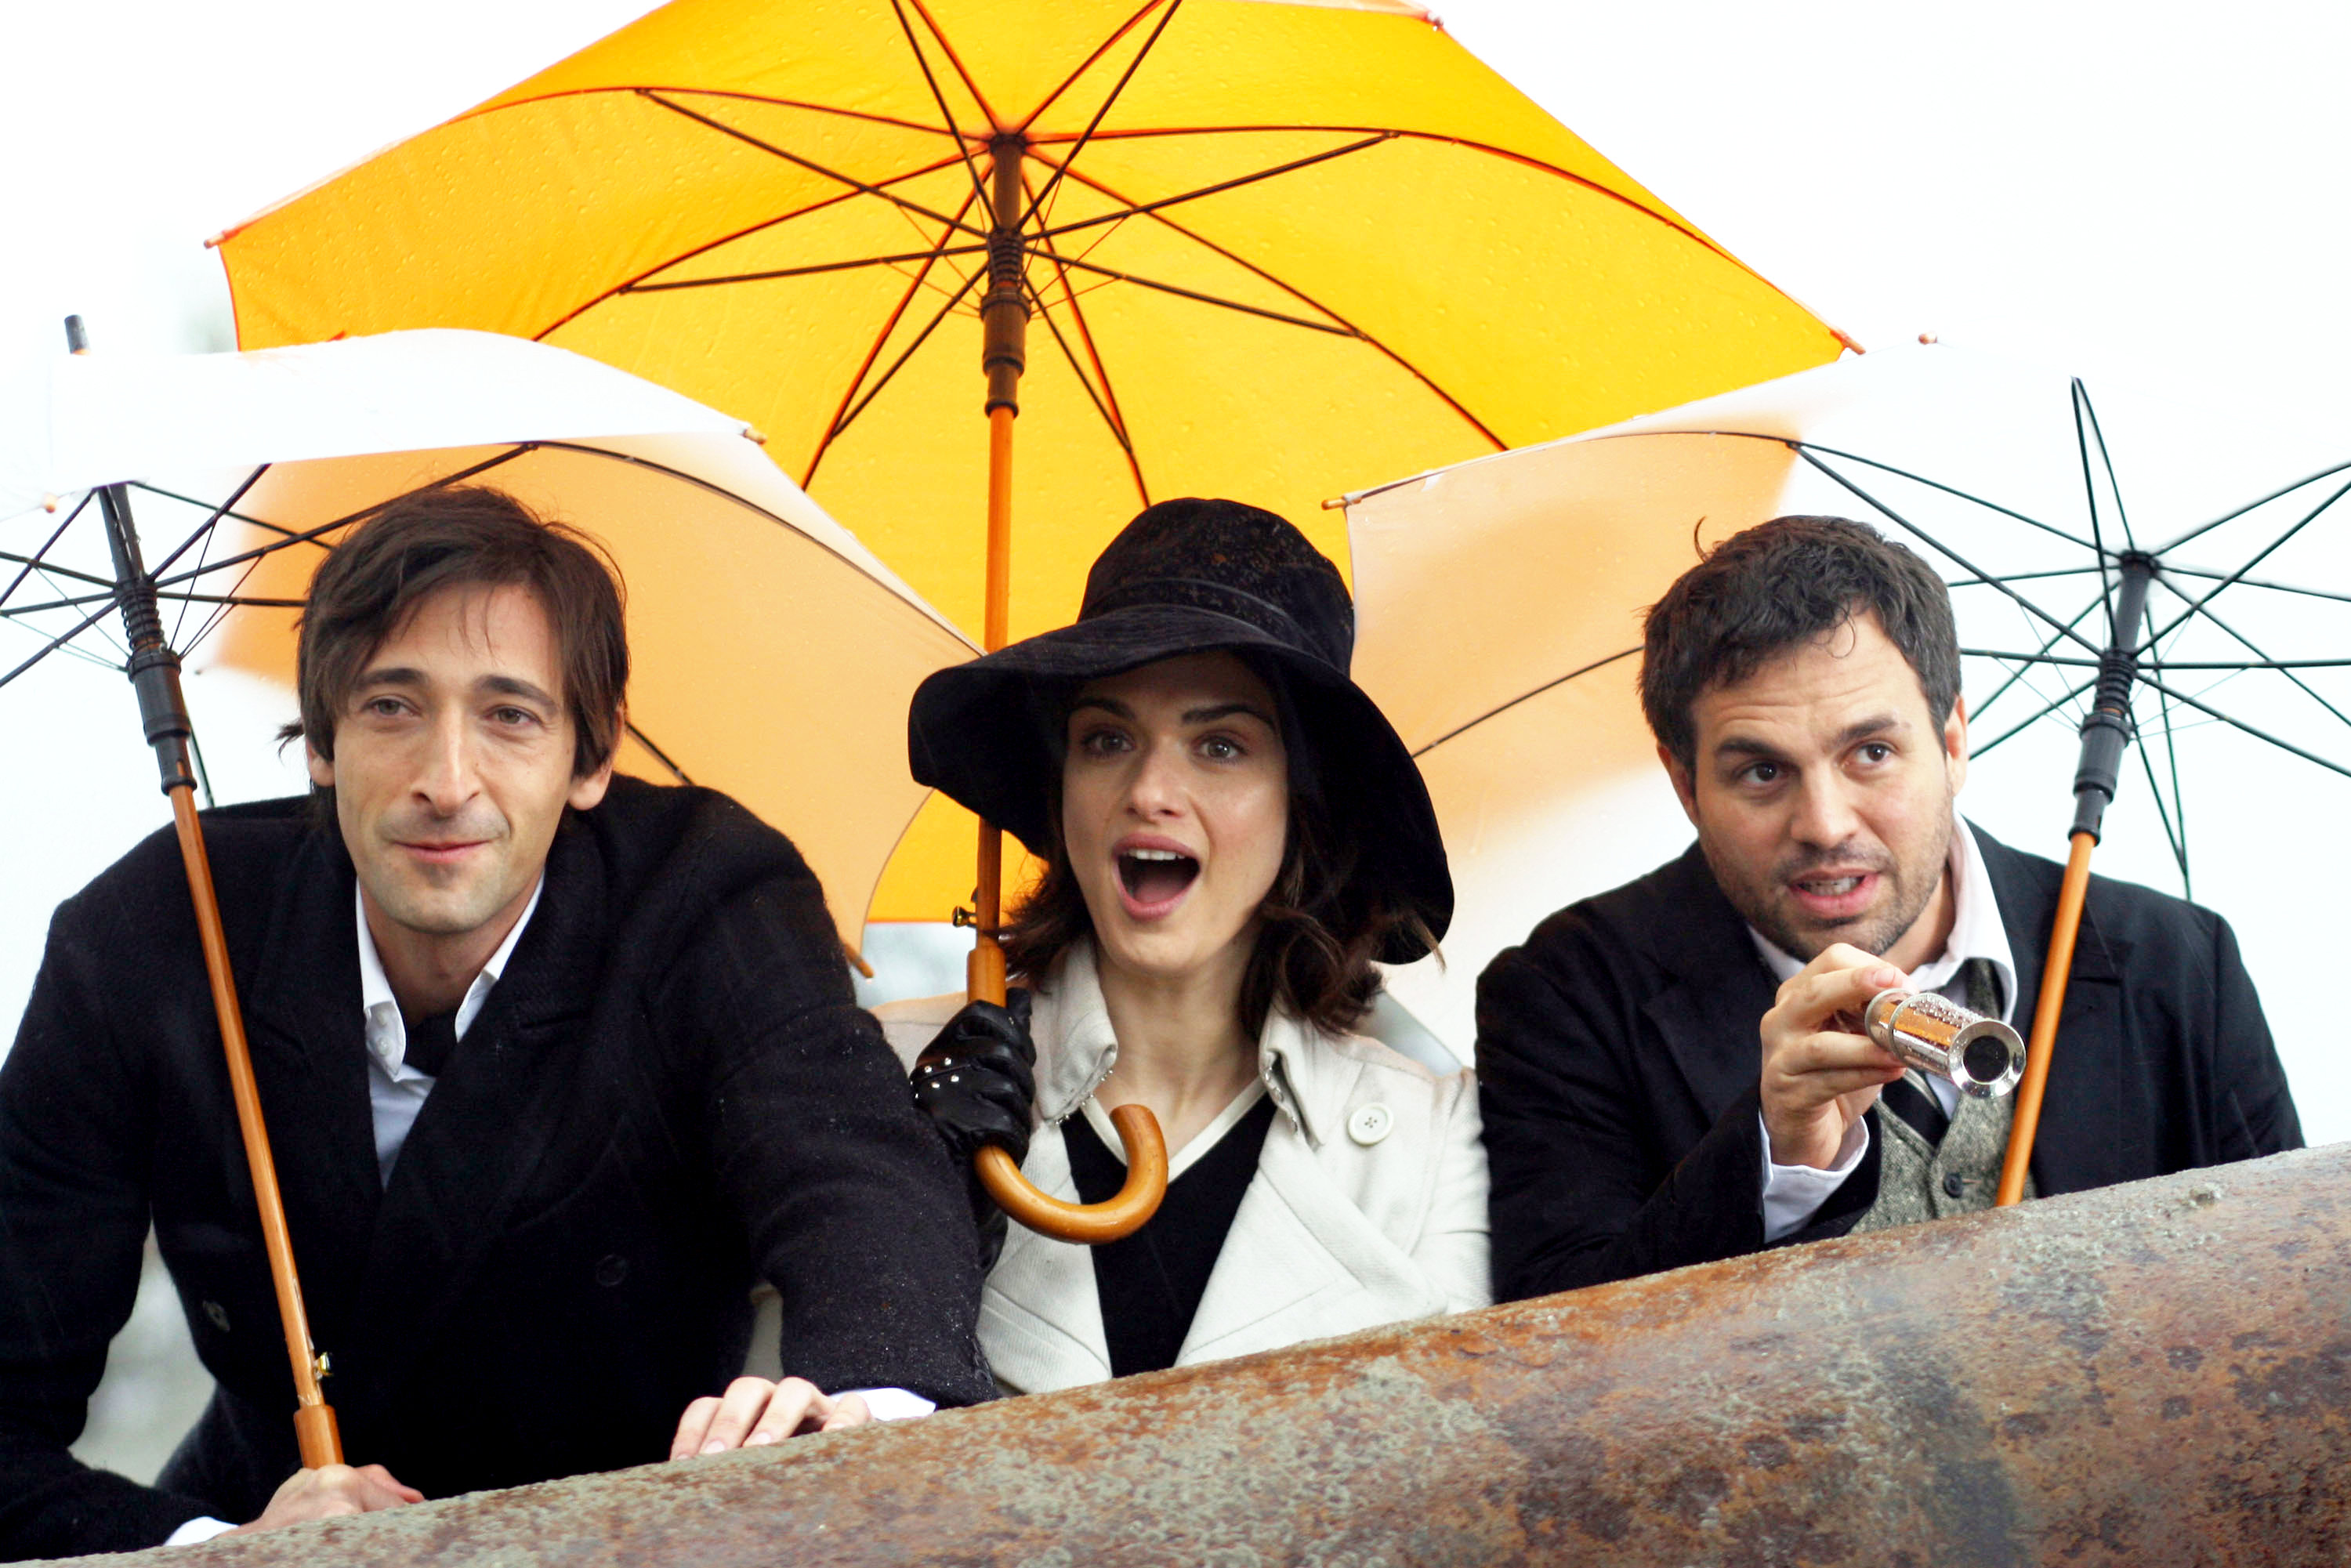 Adrien Brody, Rachel Weisz and Mark Ruffalo in Summit Entertainment's The Brothers Bloom (2009)